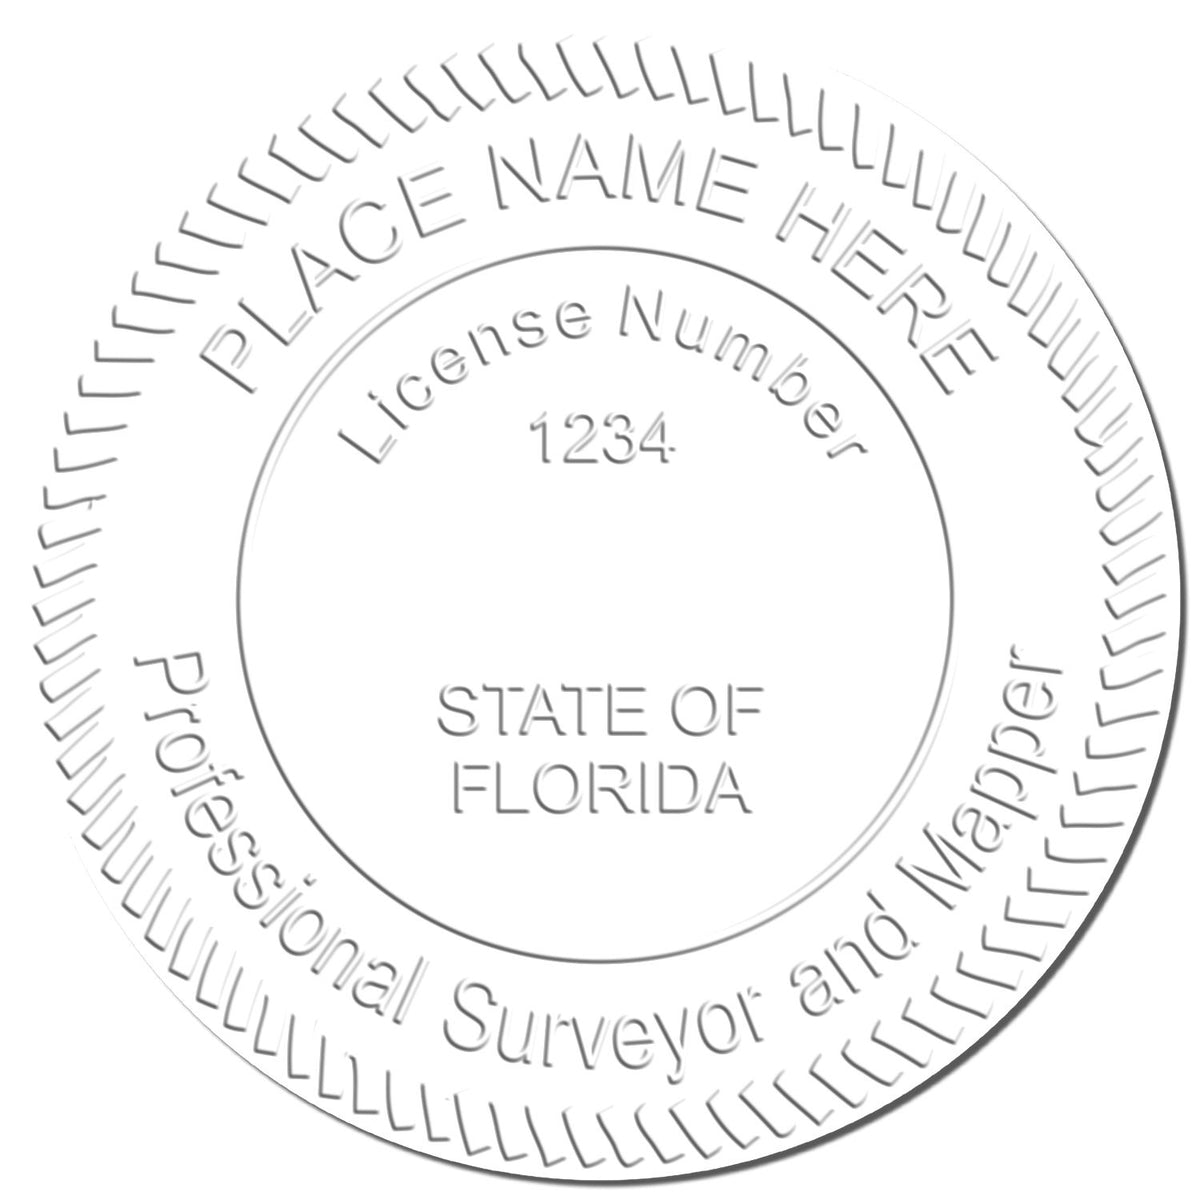 This paper is stamped with a sample imprint of the State of Florida Soft Land Surveyor Embossing Seal, signifying its quality and reliability.